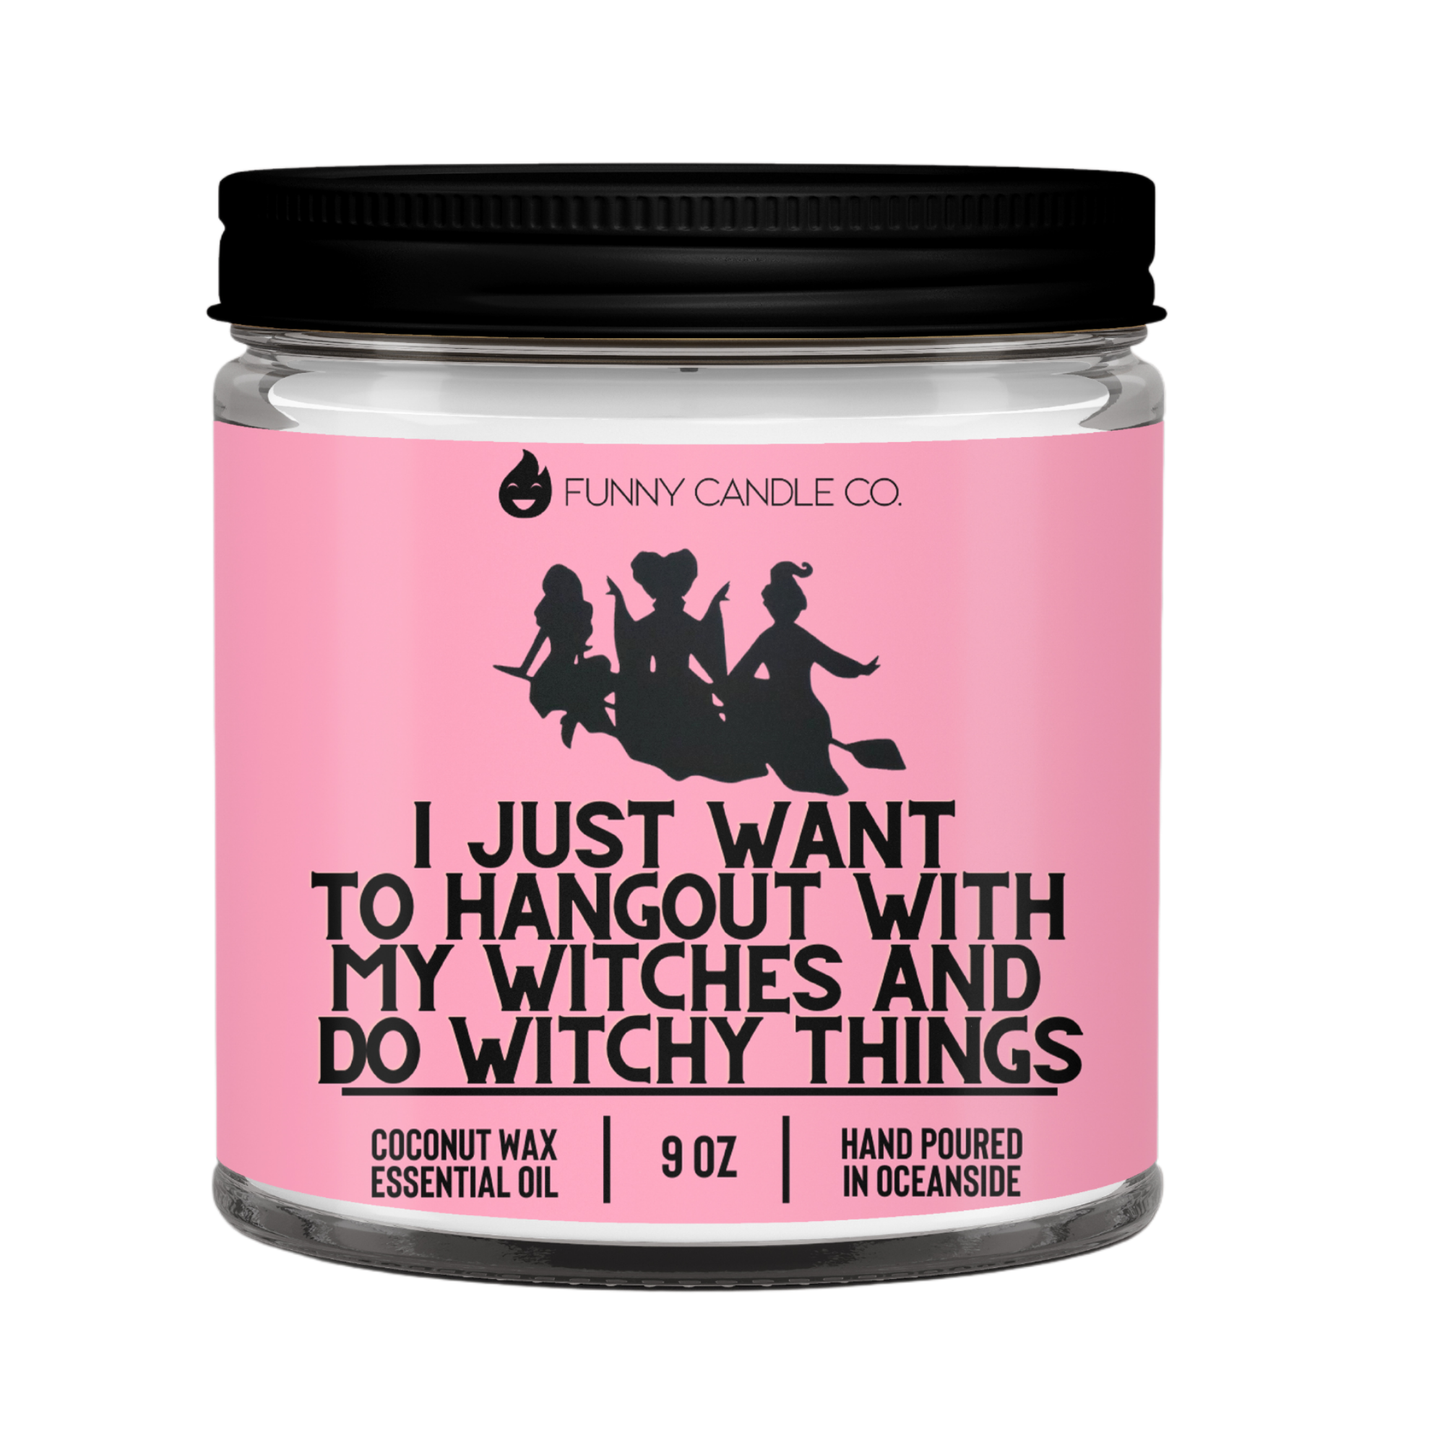 I Just Want To Hangout With My Witches (dark pink)- 9 oz